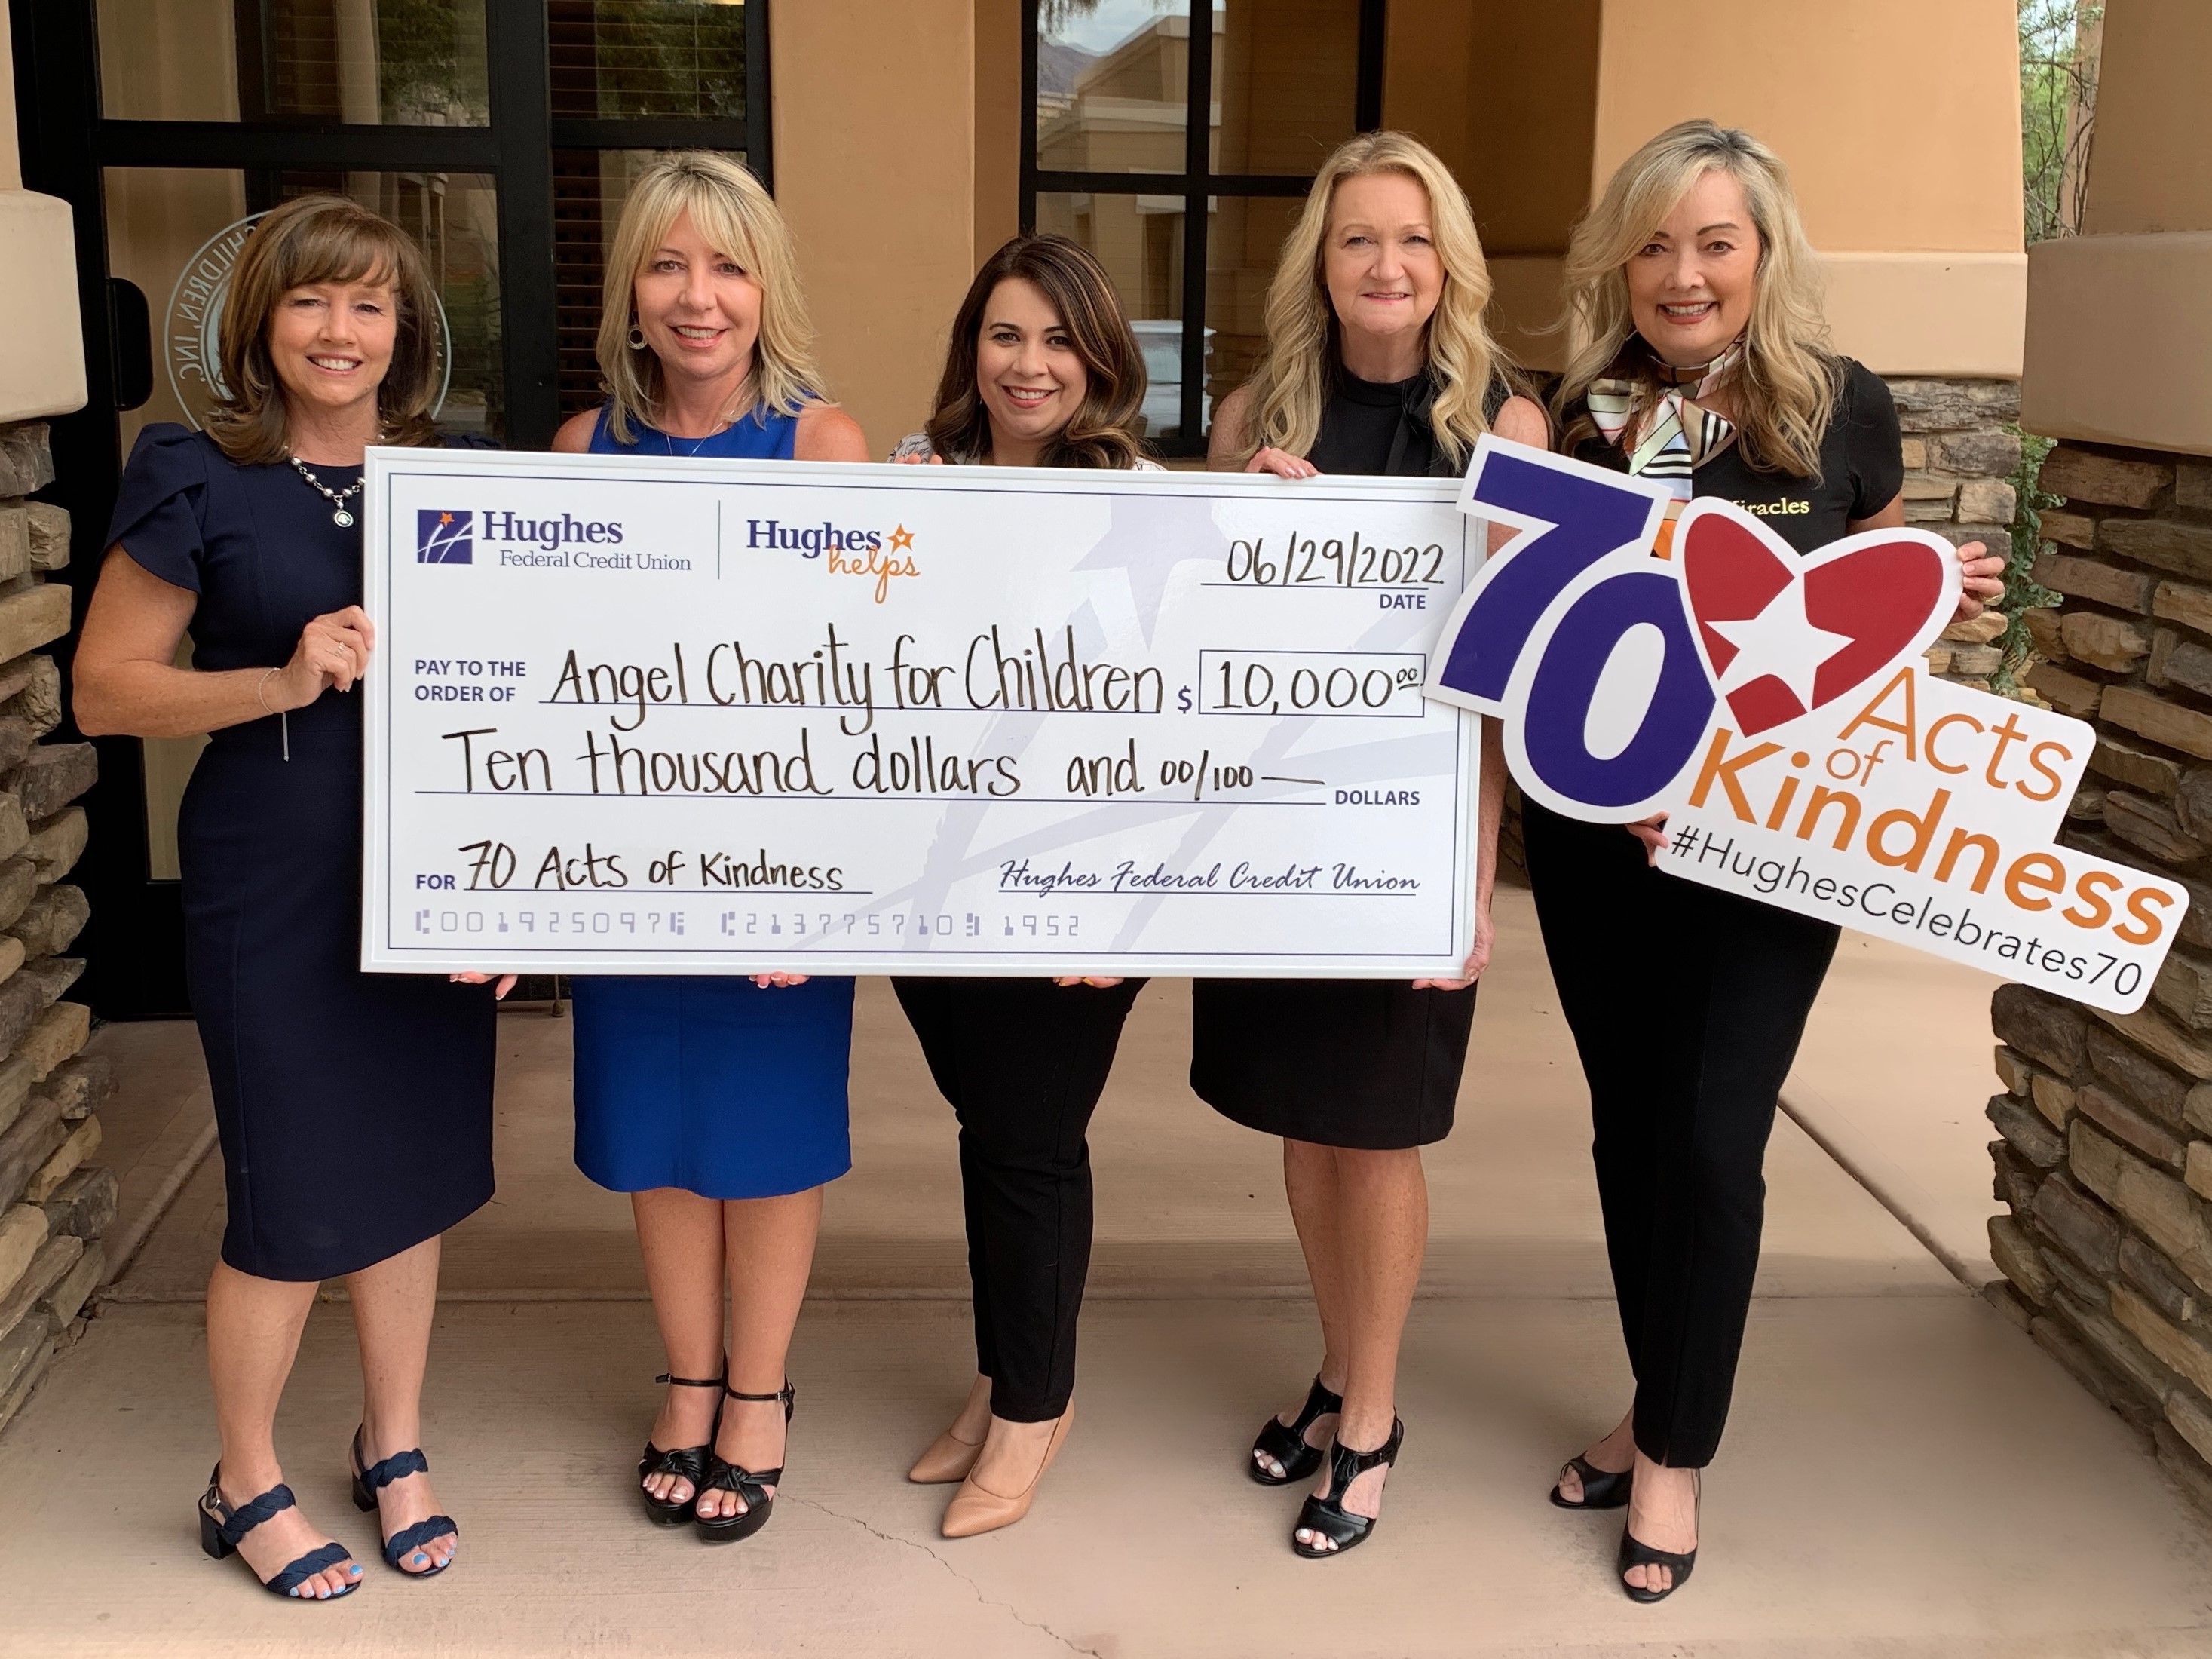 The Angel Charity and Hughes team pose with giant check and 70 acts of kindness sign